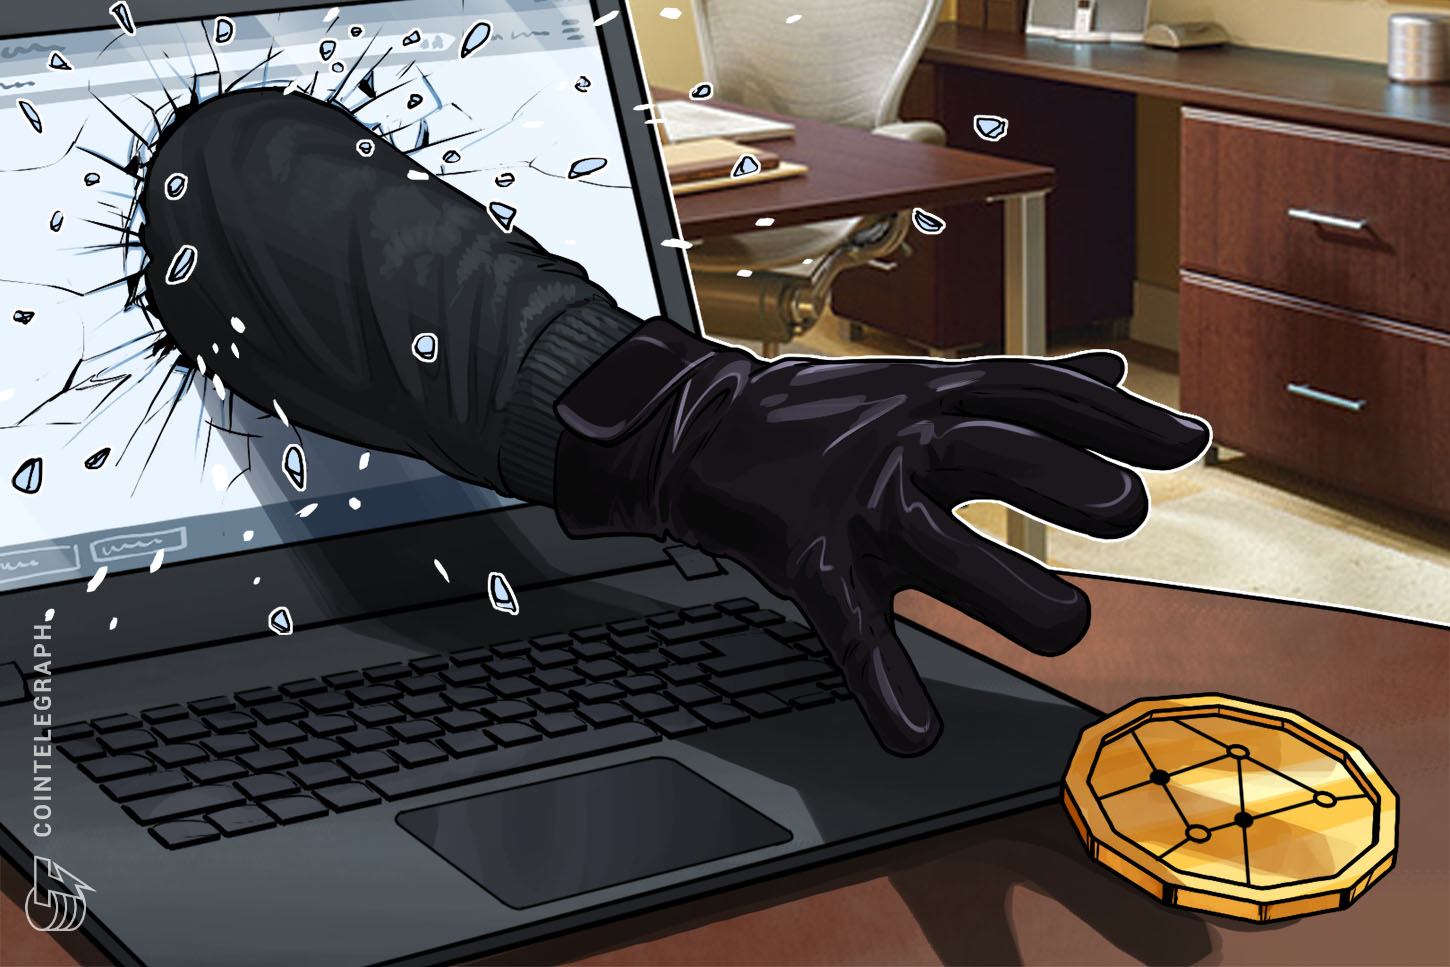 Journey Administration Firm CWT Pays $4.5M Bitcoin to Hackers